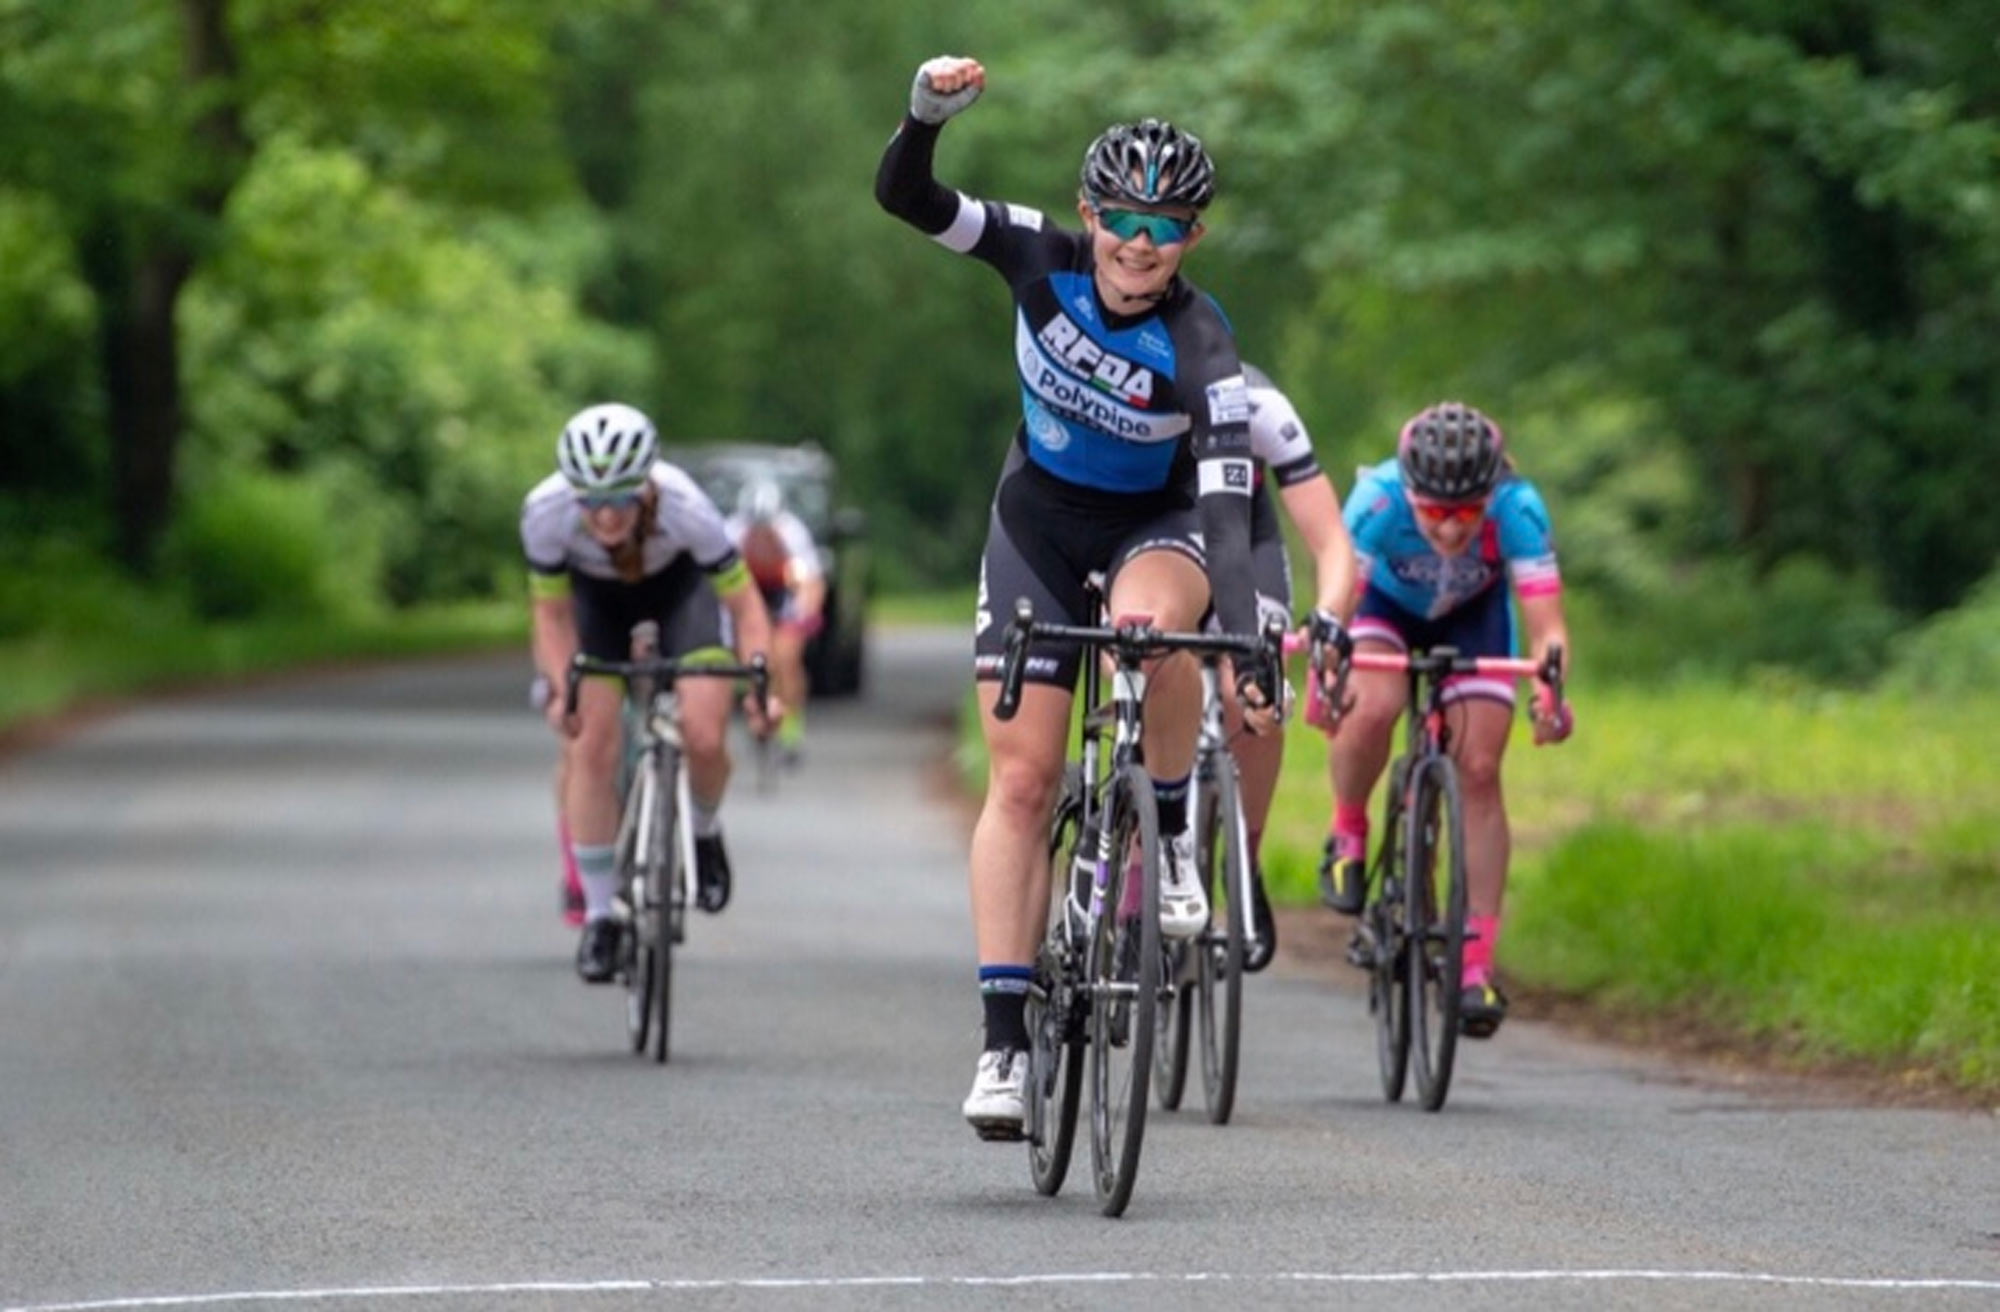 Abi crosses the line in first place in the Yorkshire Road Race Championships, which also incorporated the North-East and North West regions AN exceptionally talented 17-year-old Ripon Grammar School student blew the competition away at a prestigious regional cycling championships